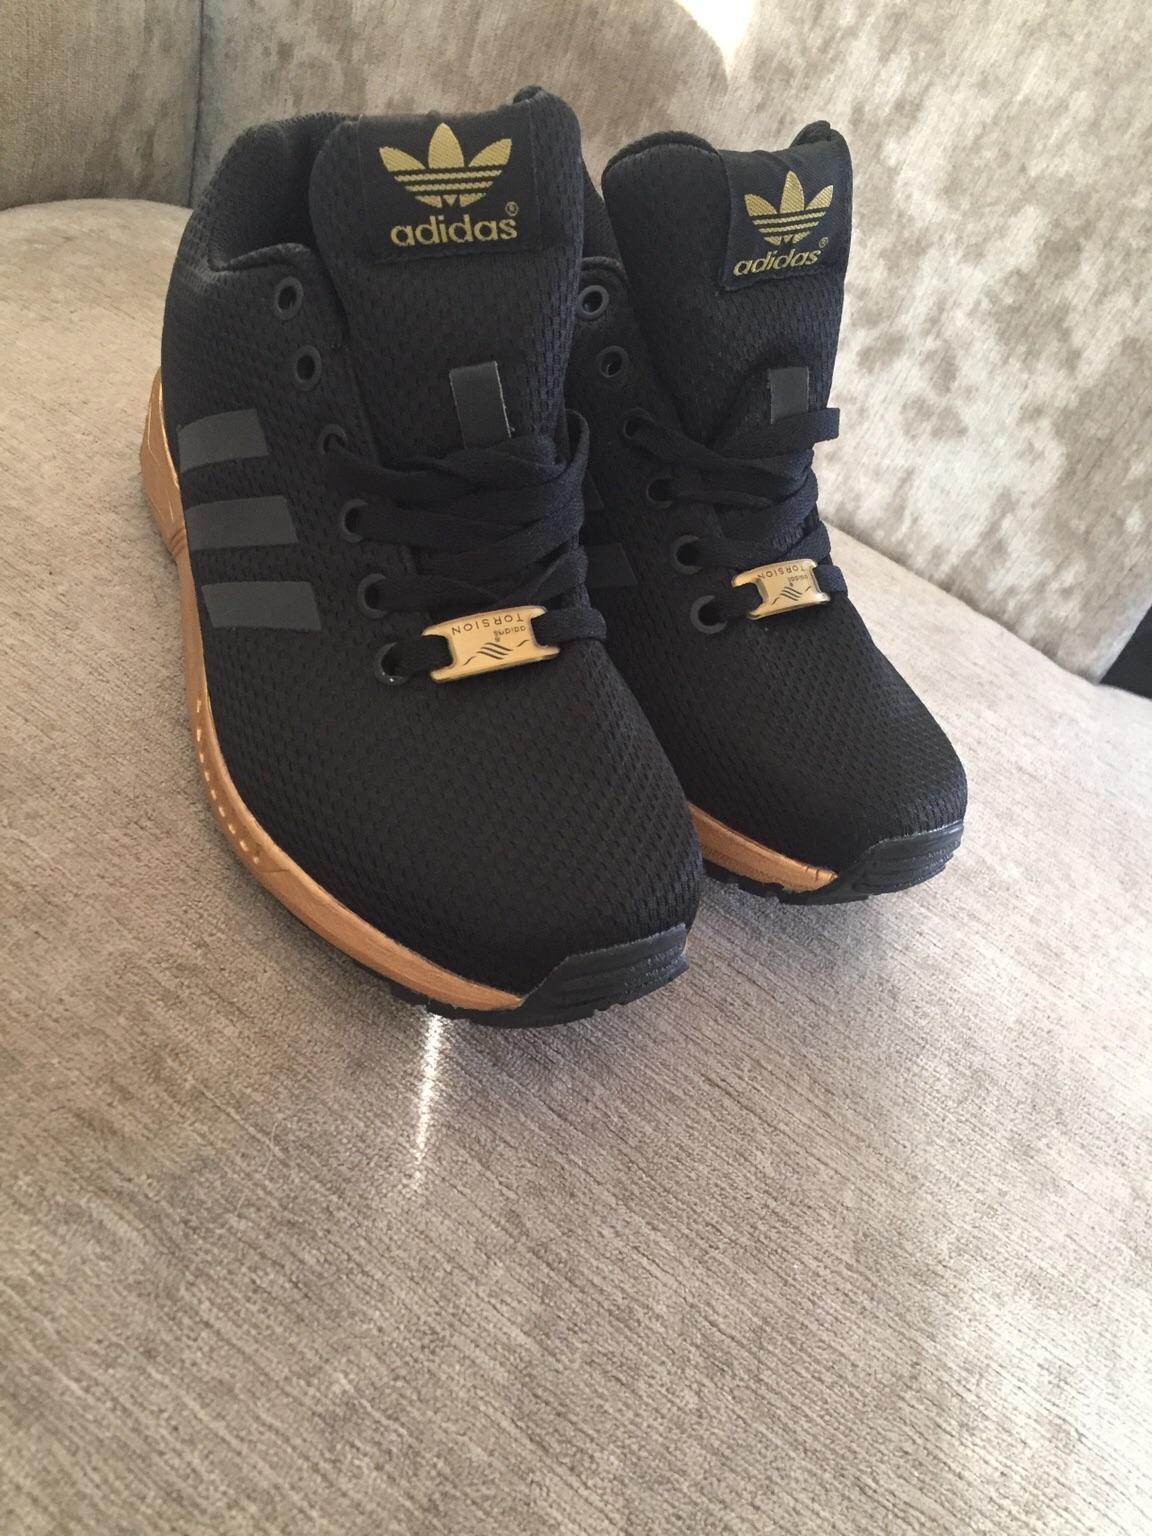 Shoes, Adidas Shoes, Gold Zx Flux, Adidas, Adidas Zx Flux, Black Sneakers, Black, Gold, Adiddas, Black And Gold Adidas Flux, Top Sneakers | xn--90absbknhbvge.xn--p1ai:443